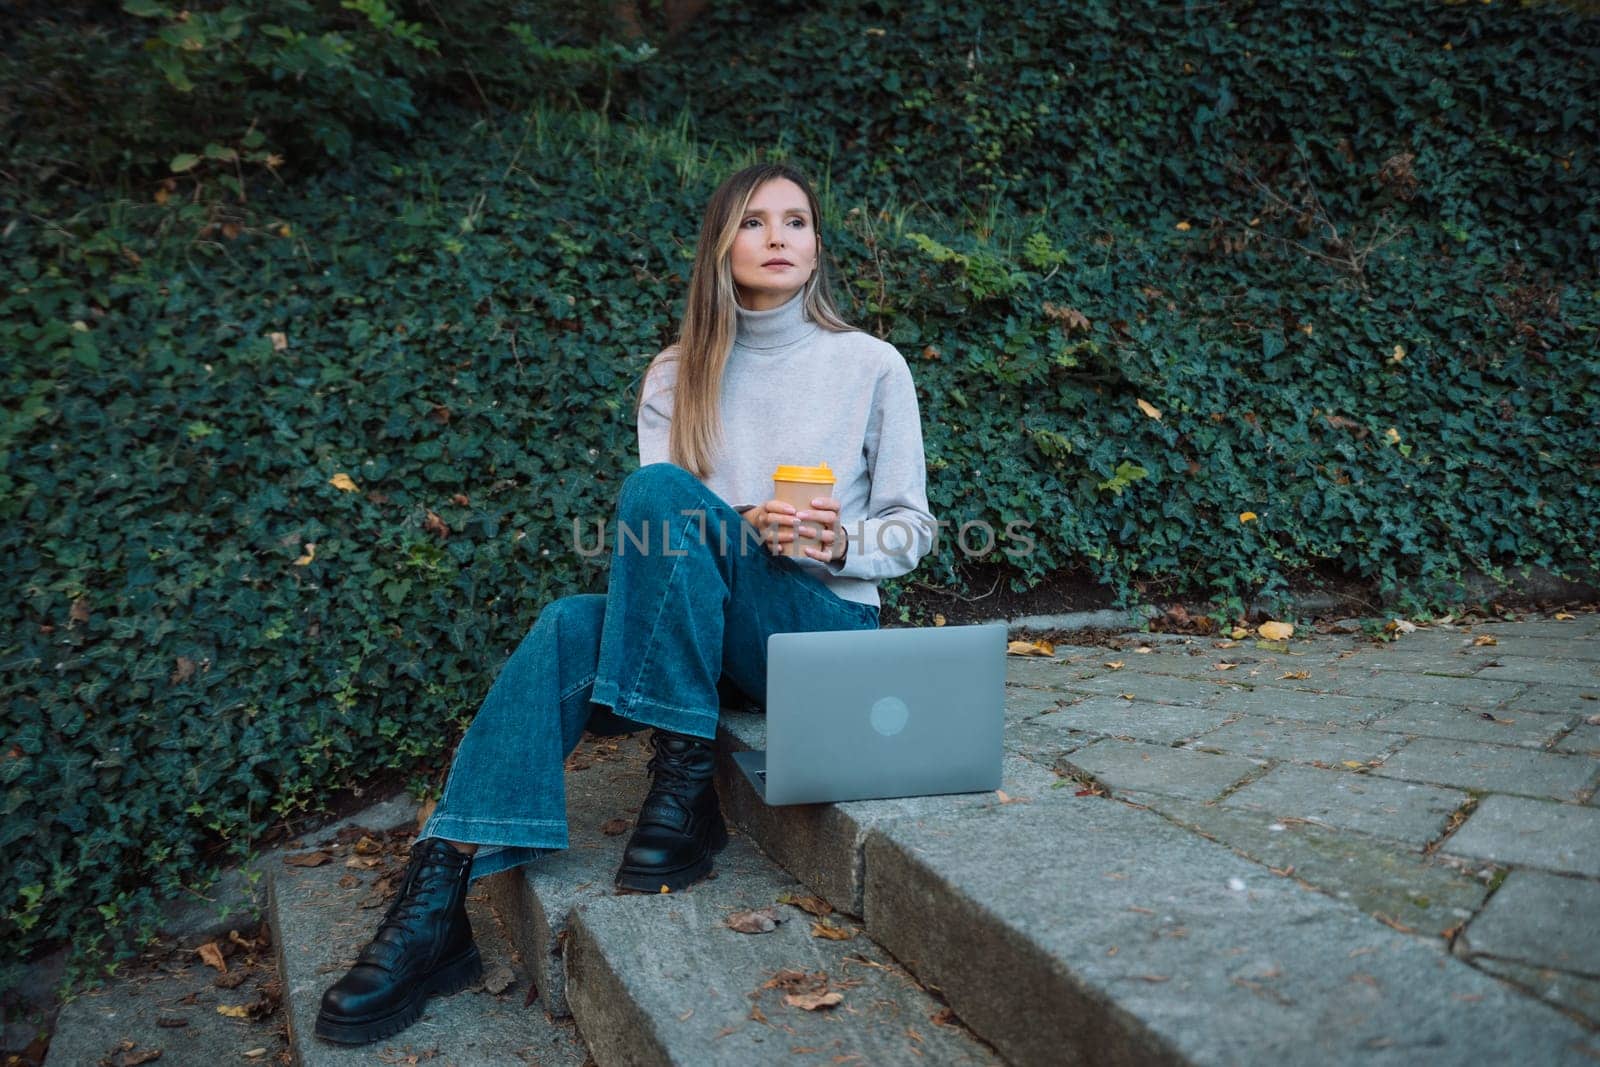 A woman sits on the ground with a cup in her hand. She is wearing a gray sweater and blue jeans. by Matiunina